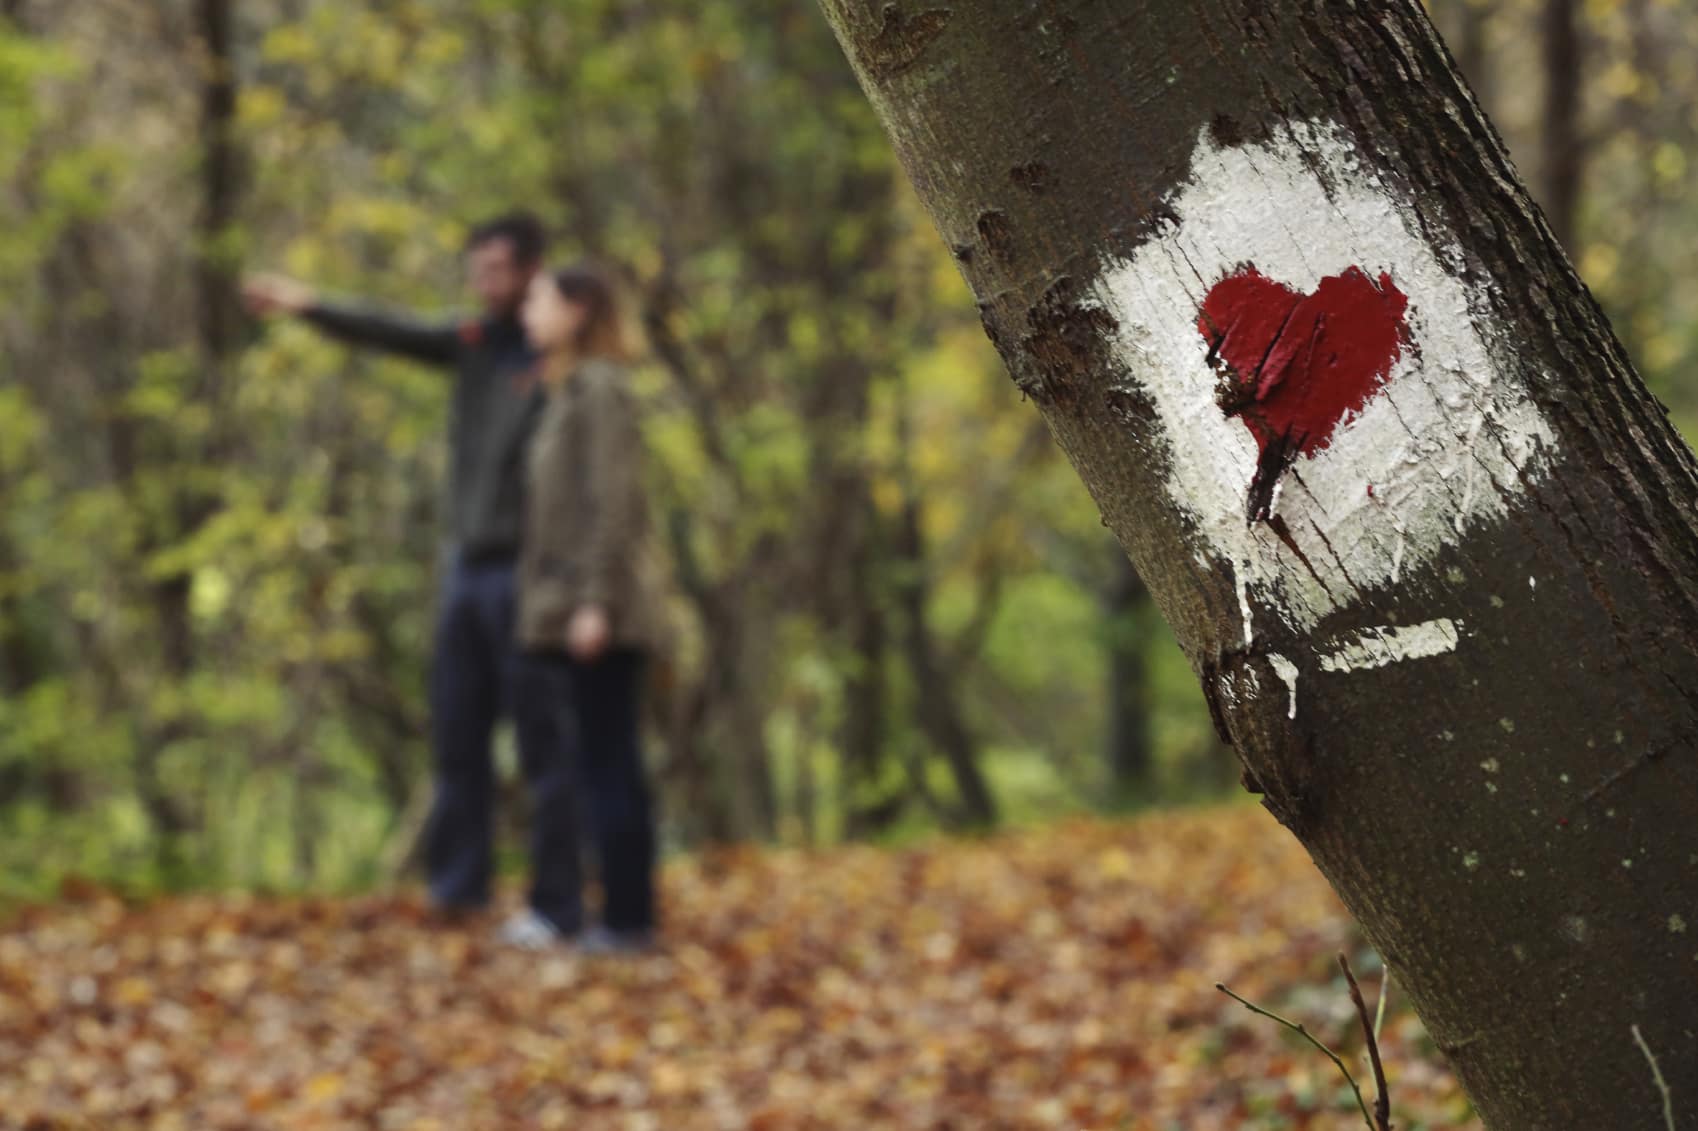 Two people in the wood. One pointing and the other looking in that direction. A tree with a painted trail marker with a heart on it in the foreground.